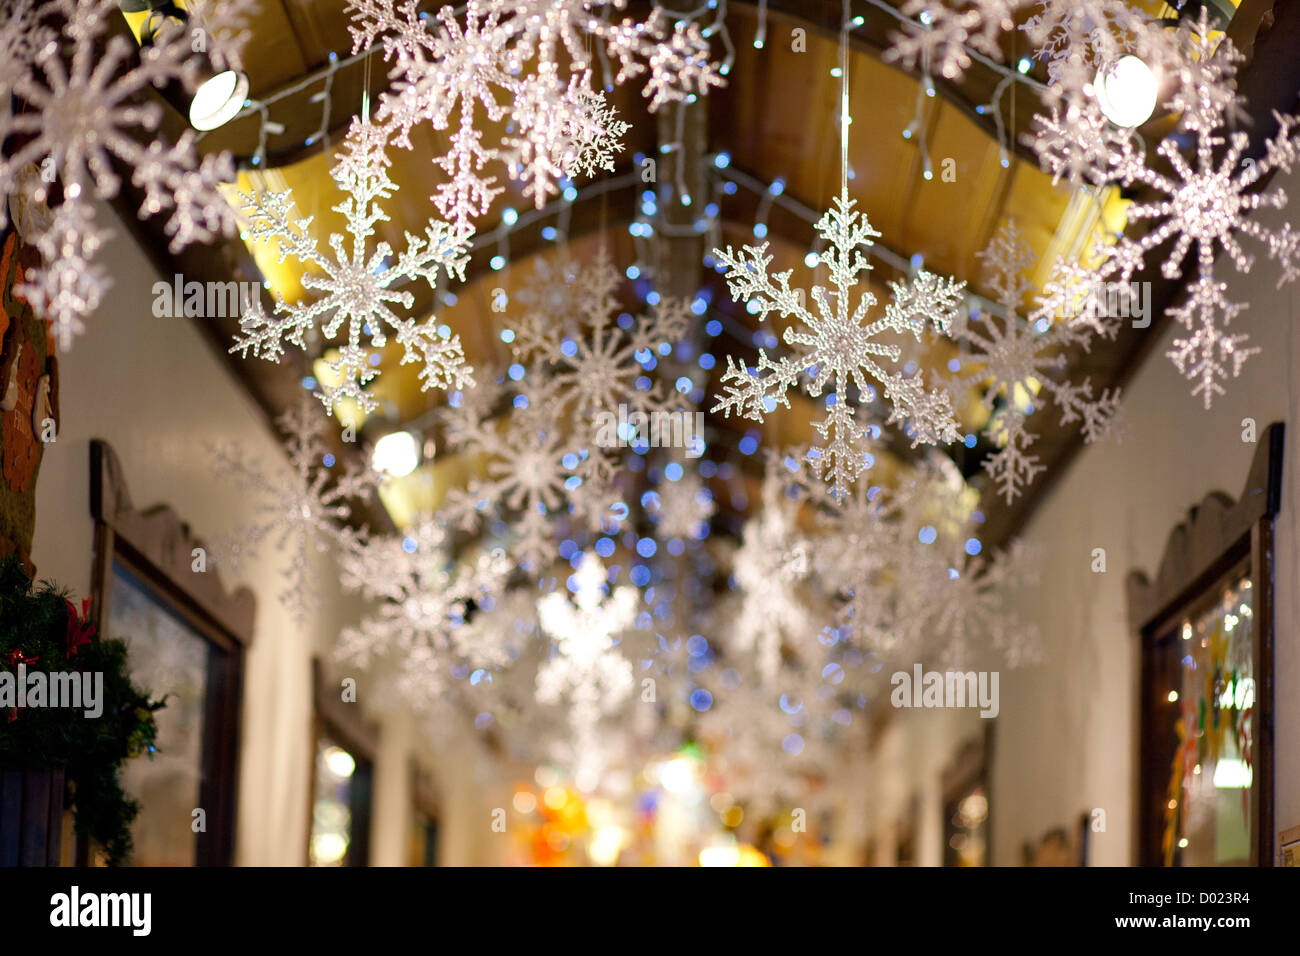 Plastic snowflake decorations in a hallway. Stock Photo